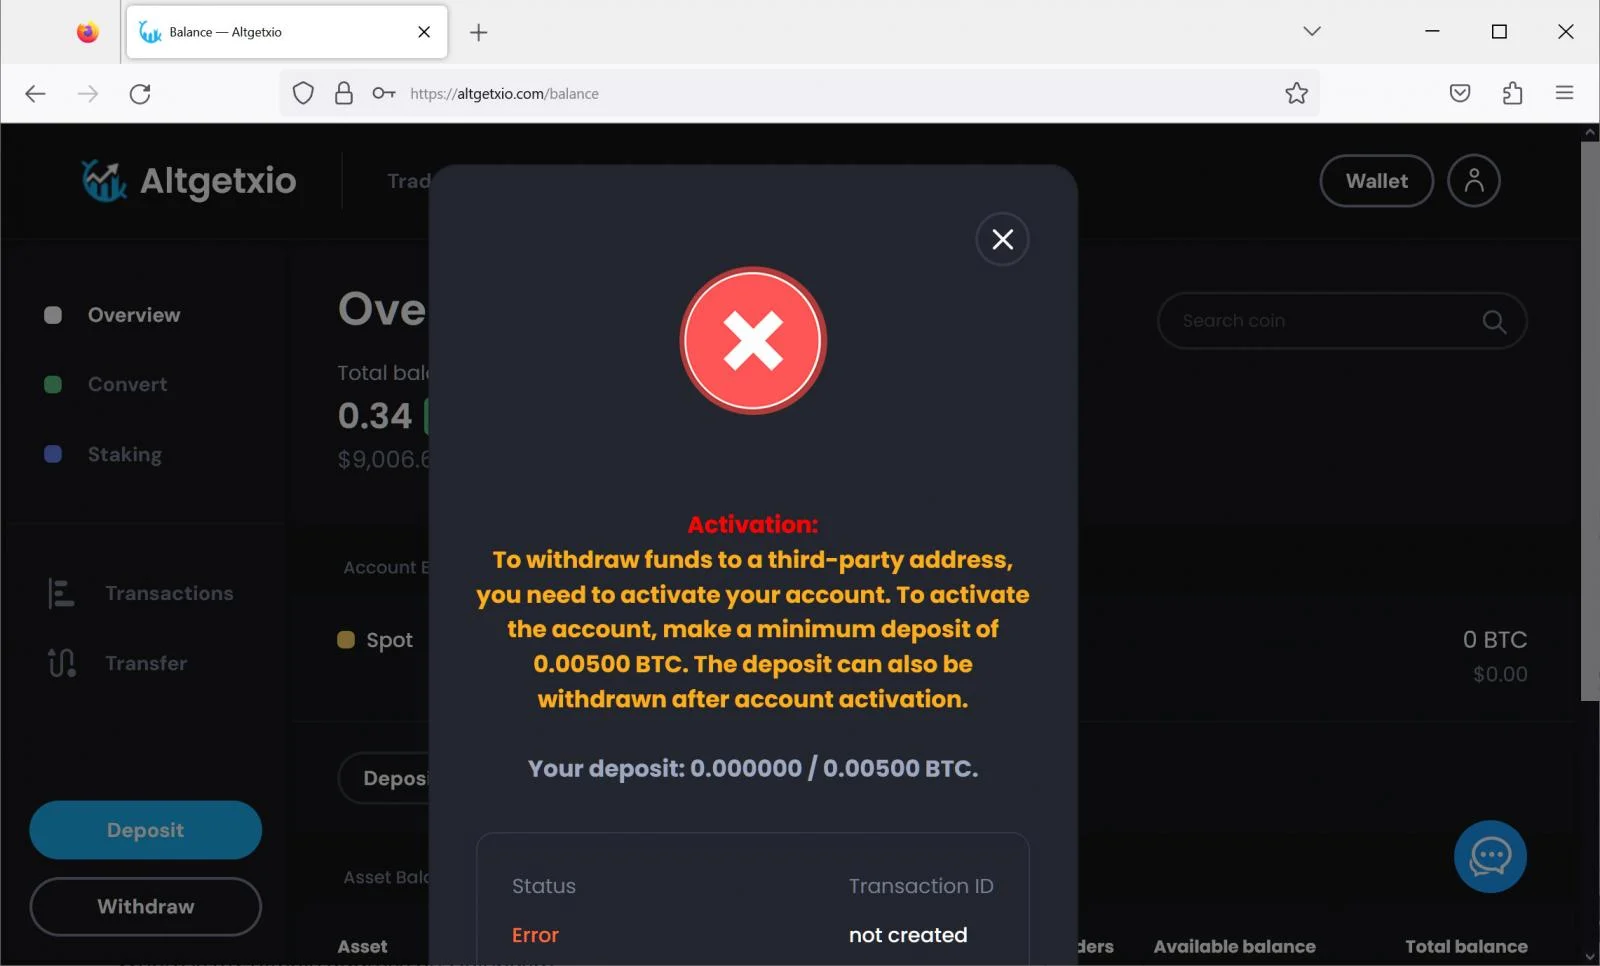 The scam website asks users to deposit 0.005 BTC to activate the account. Source: BleepingComputer